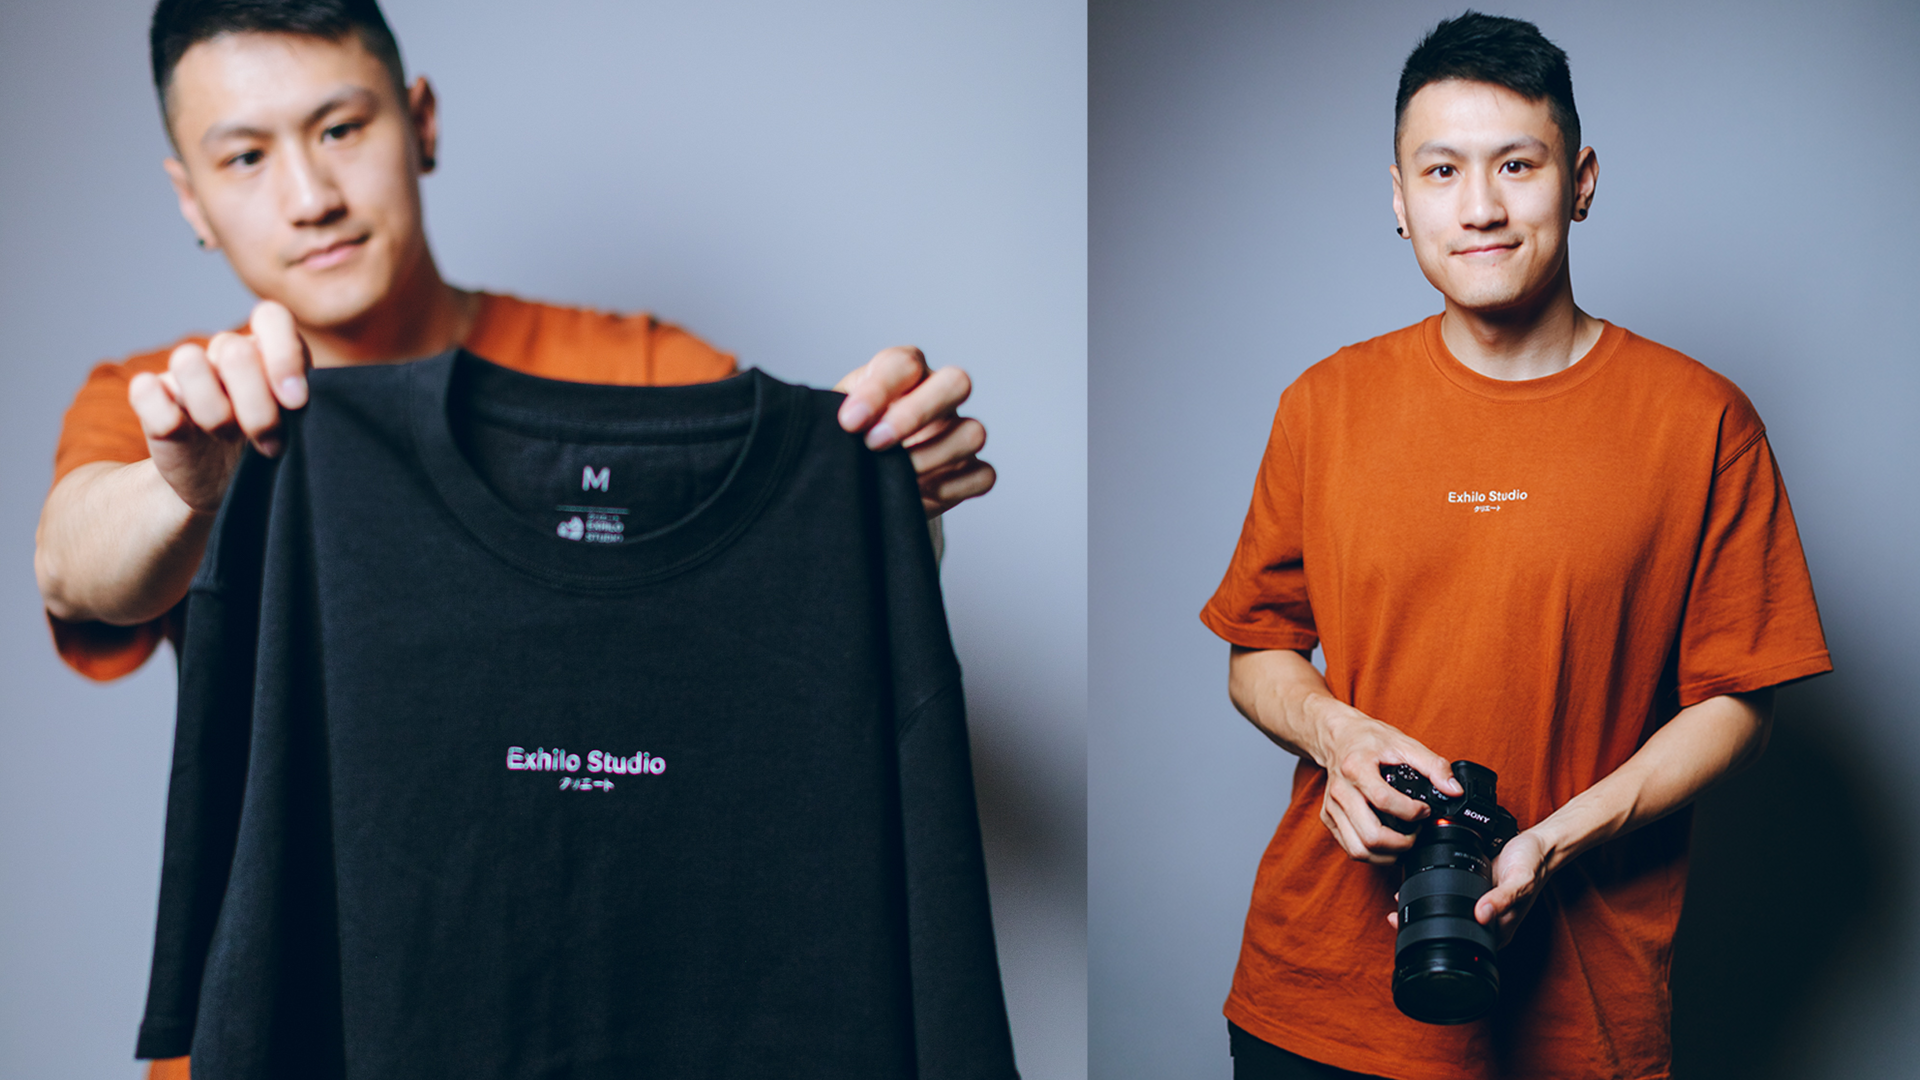 Image of Curtis, founder of Exhilo holding shirt and camera